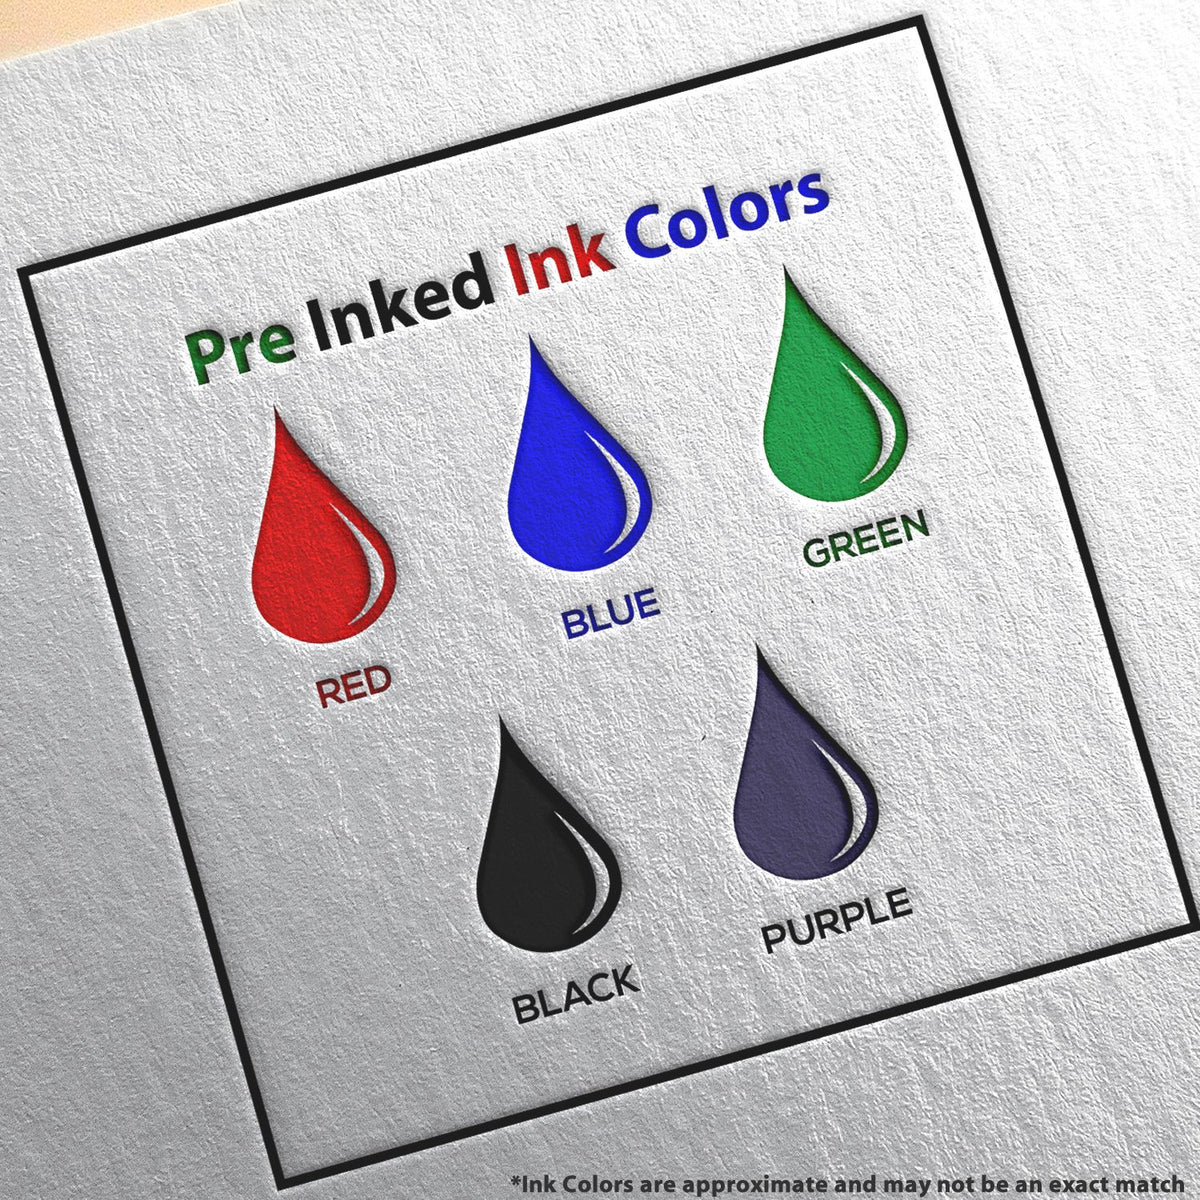 A picture showing the different ink colors or hues available for the Slim Pre-Inked Kansas Landscape Architect Seal Stamp product.